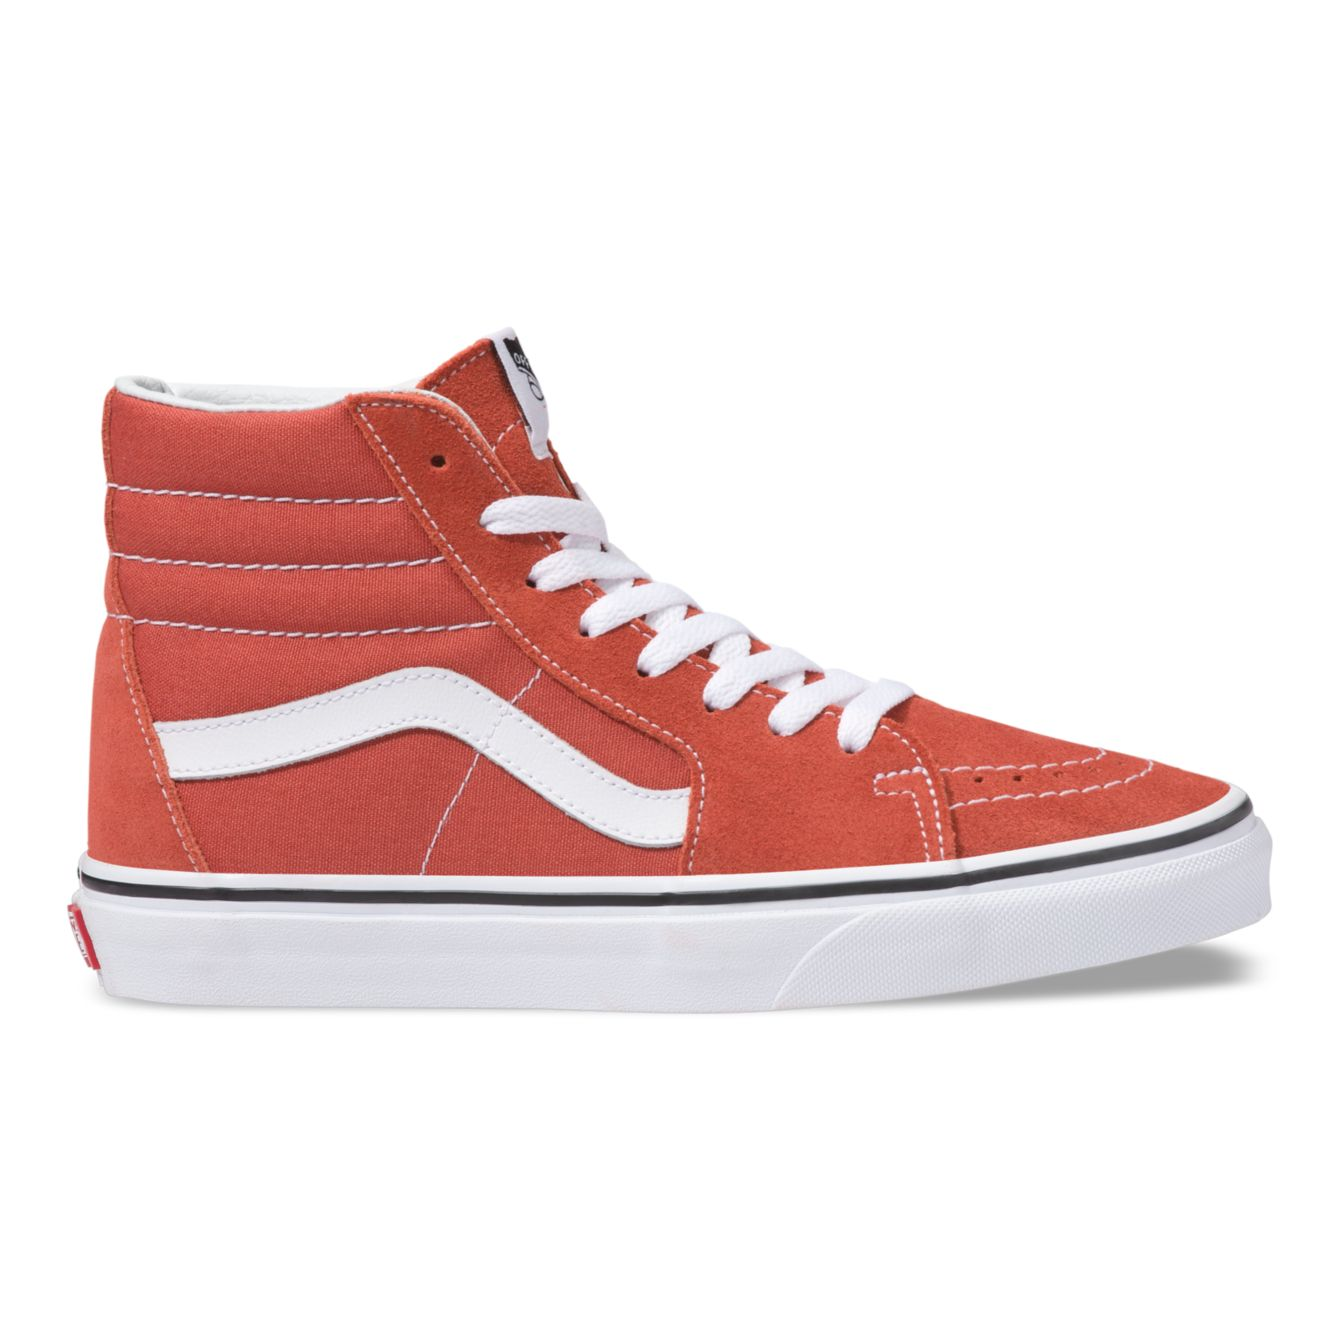 red high top vans outfits